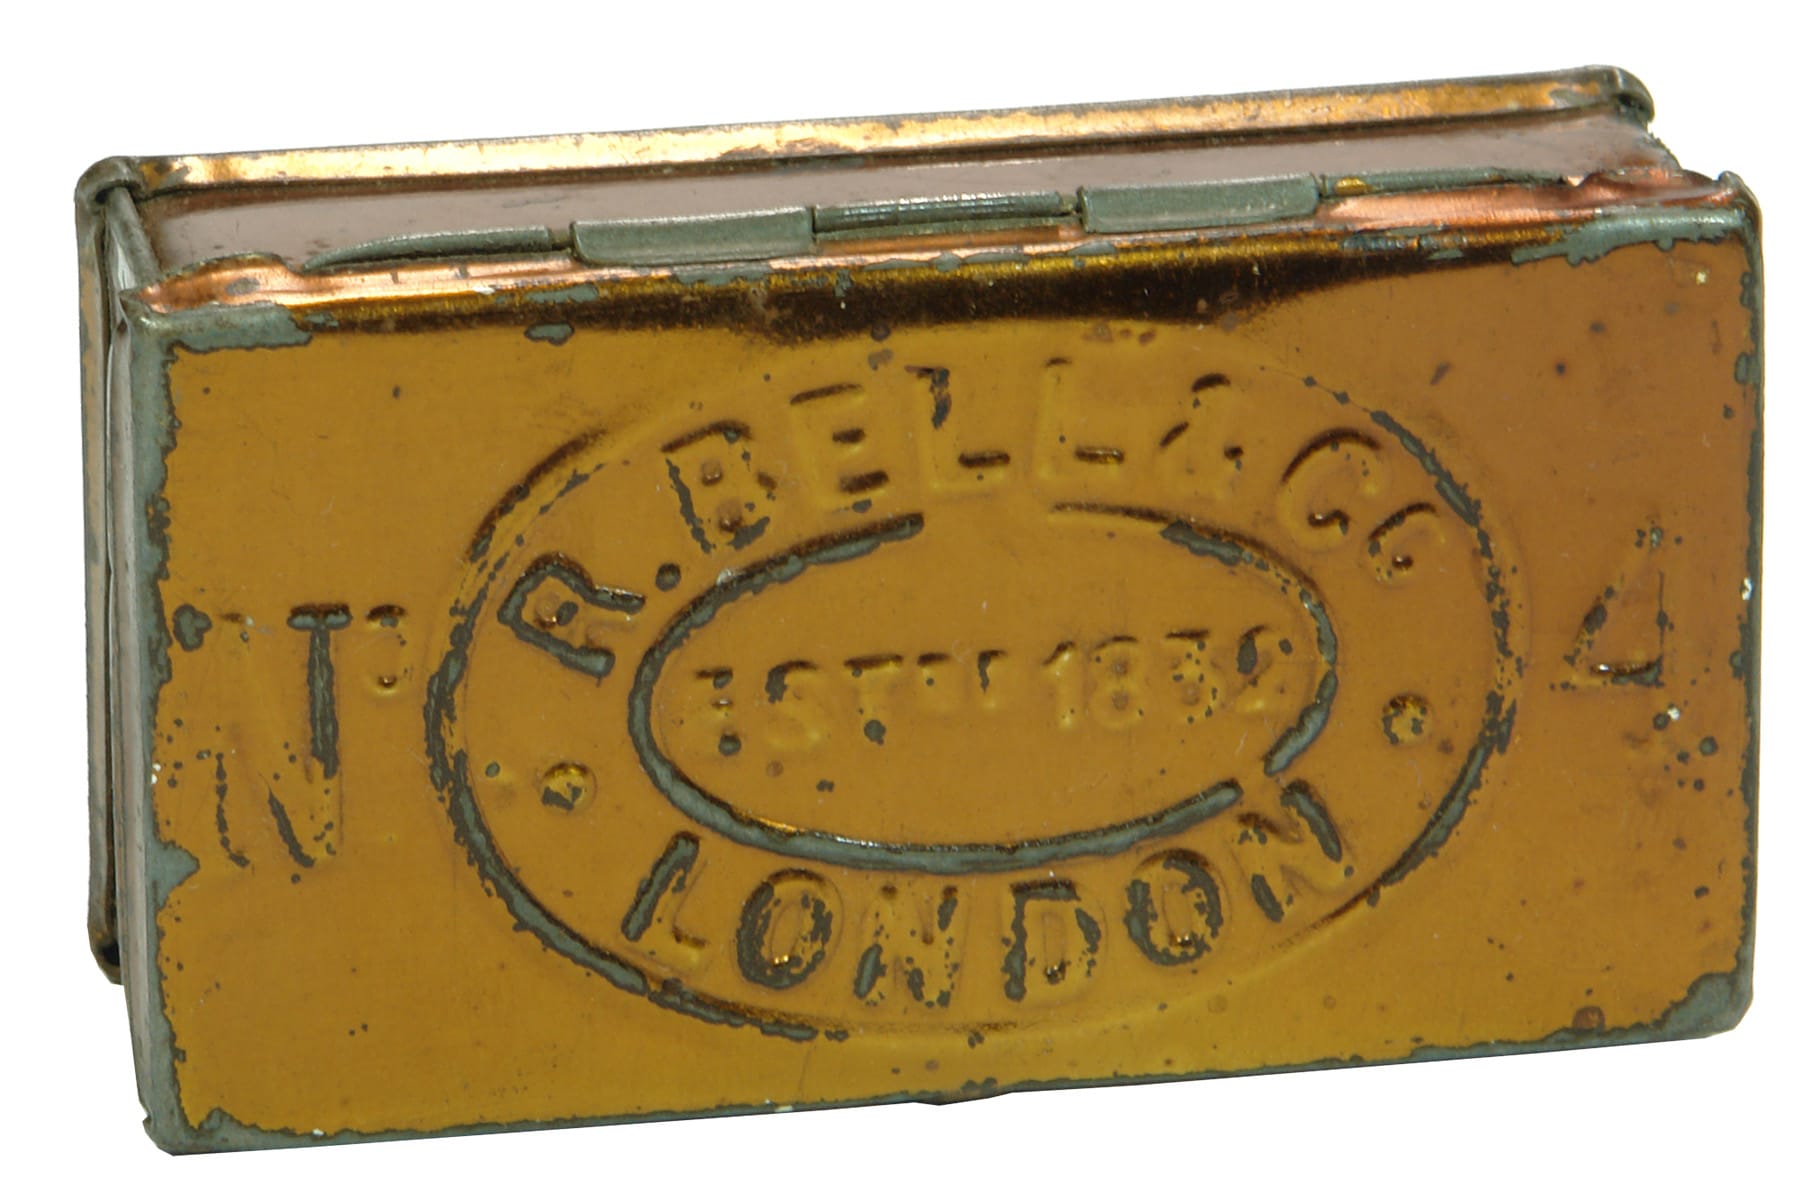 Bell London War Time Economy Tin Matches